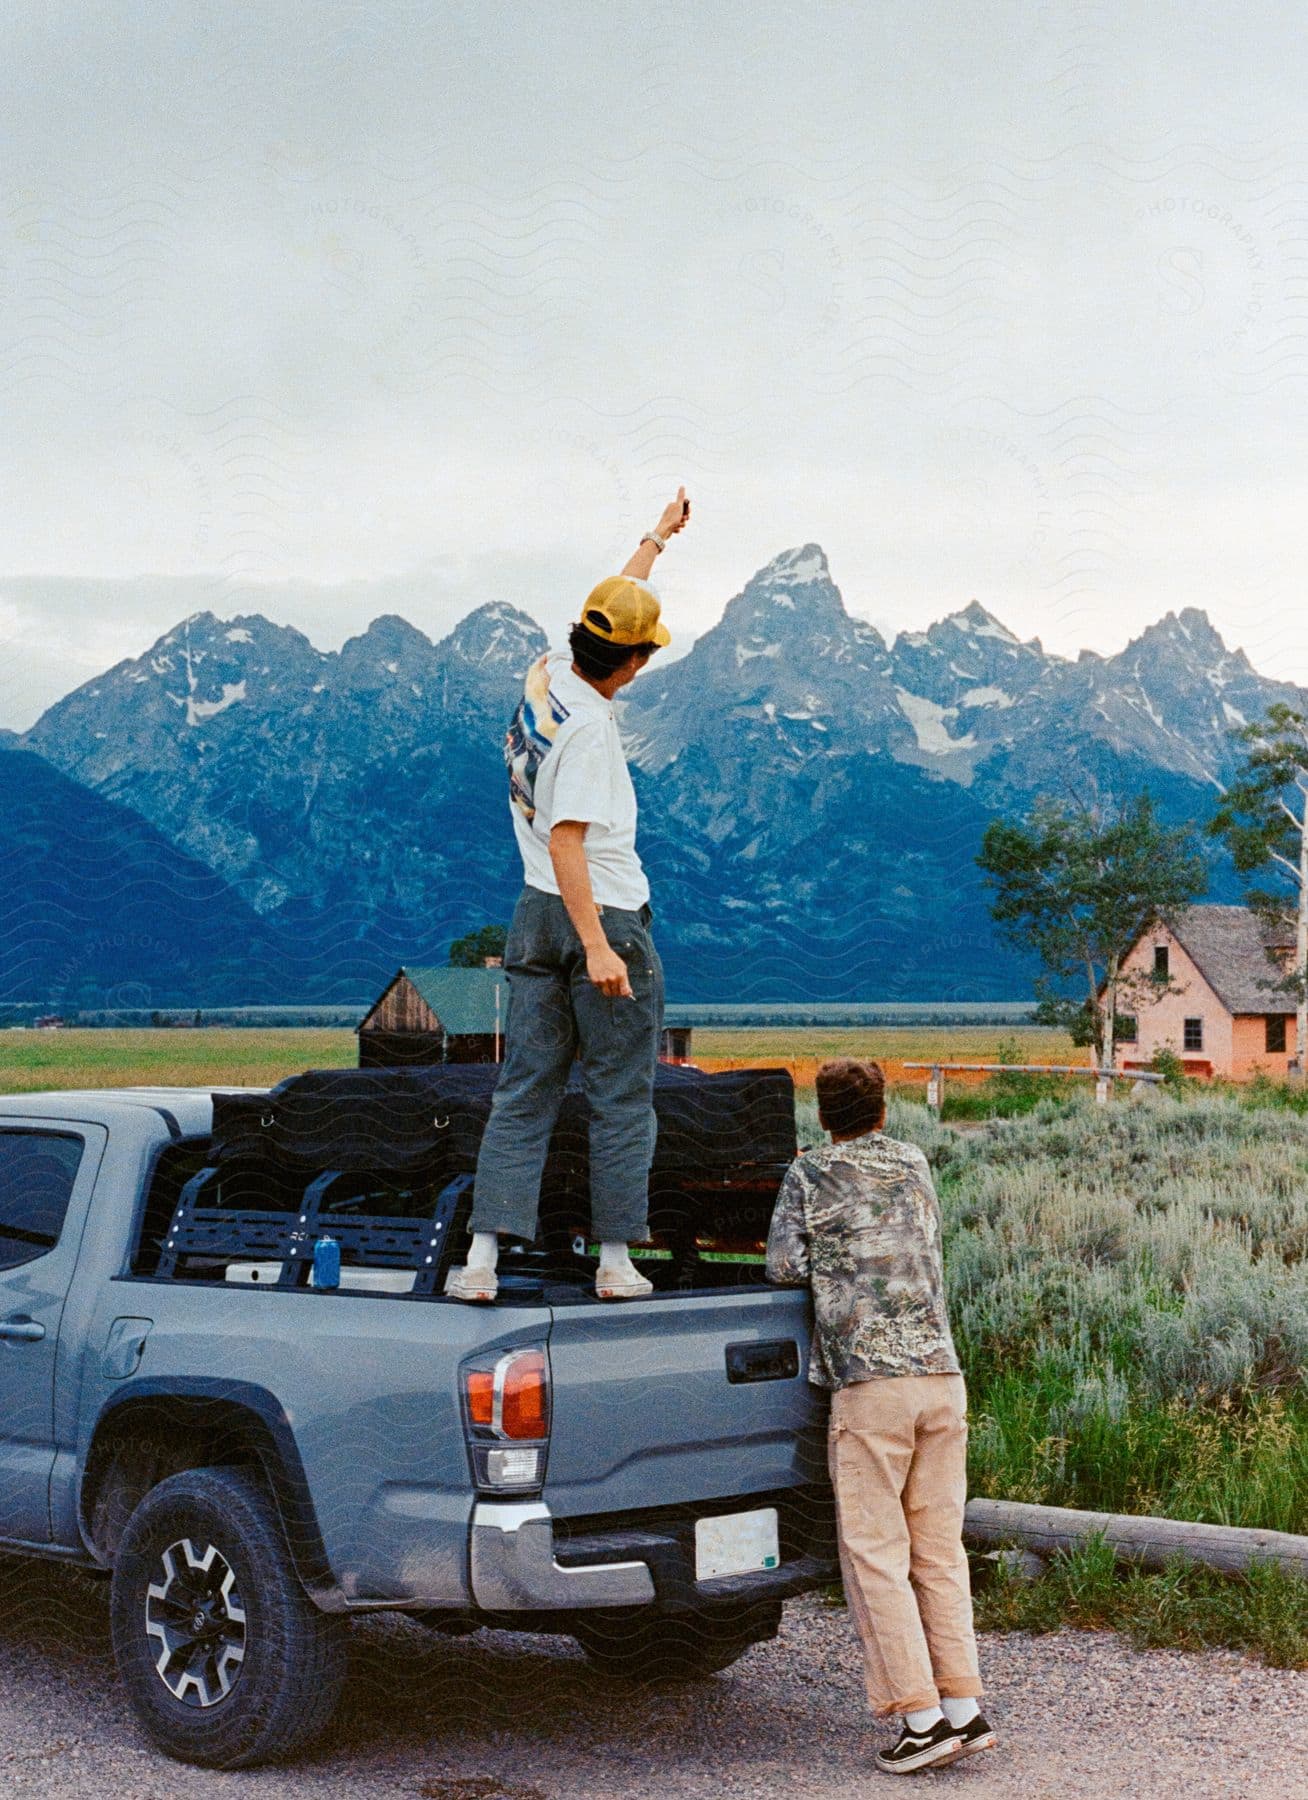 Two men standing near a truck one on the truck and the other looking at the mountain